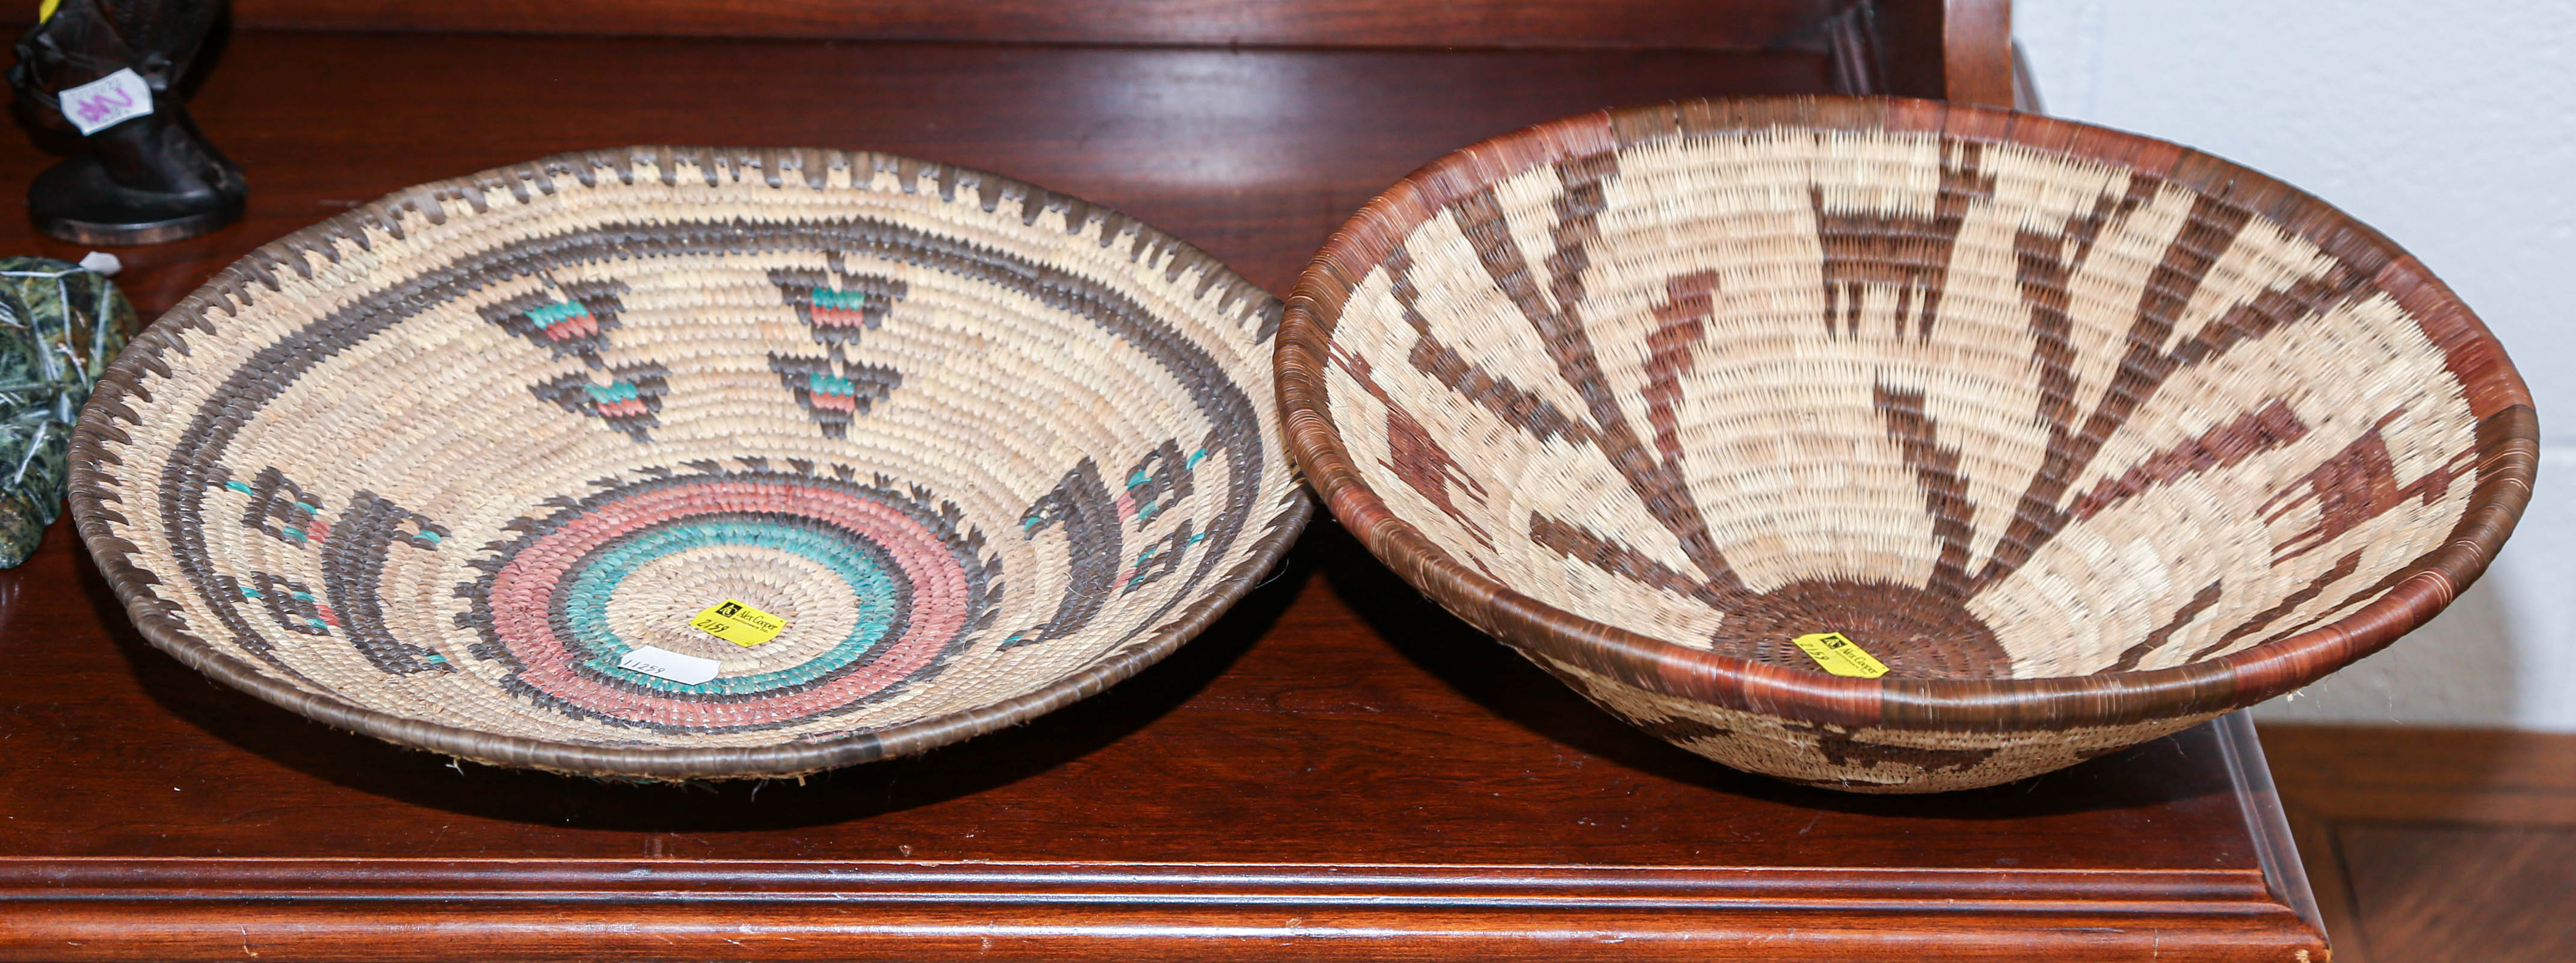 TWO NATIVE AMERICAN WOVEN BASKETS 369c02